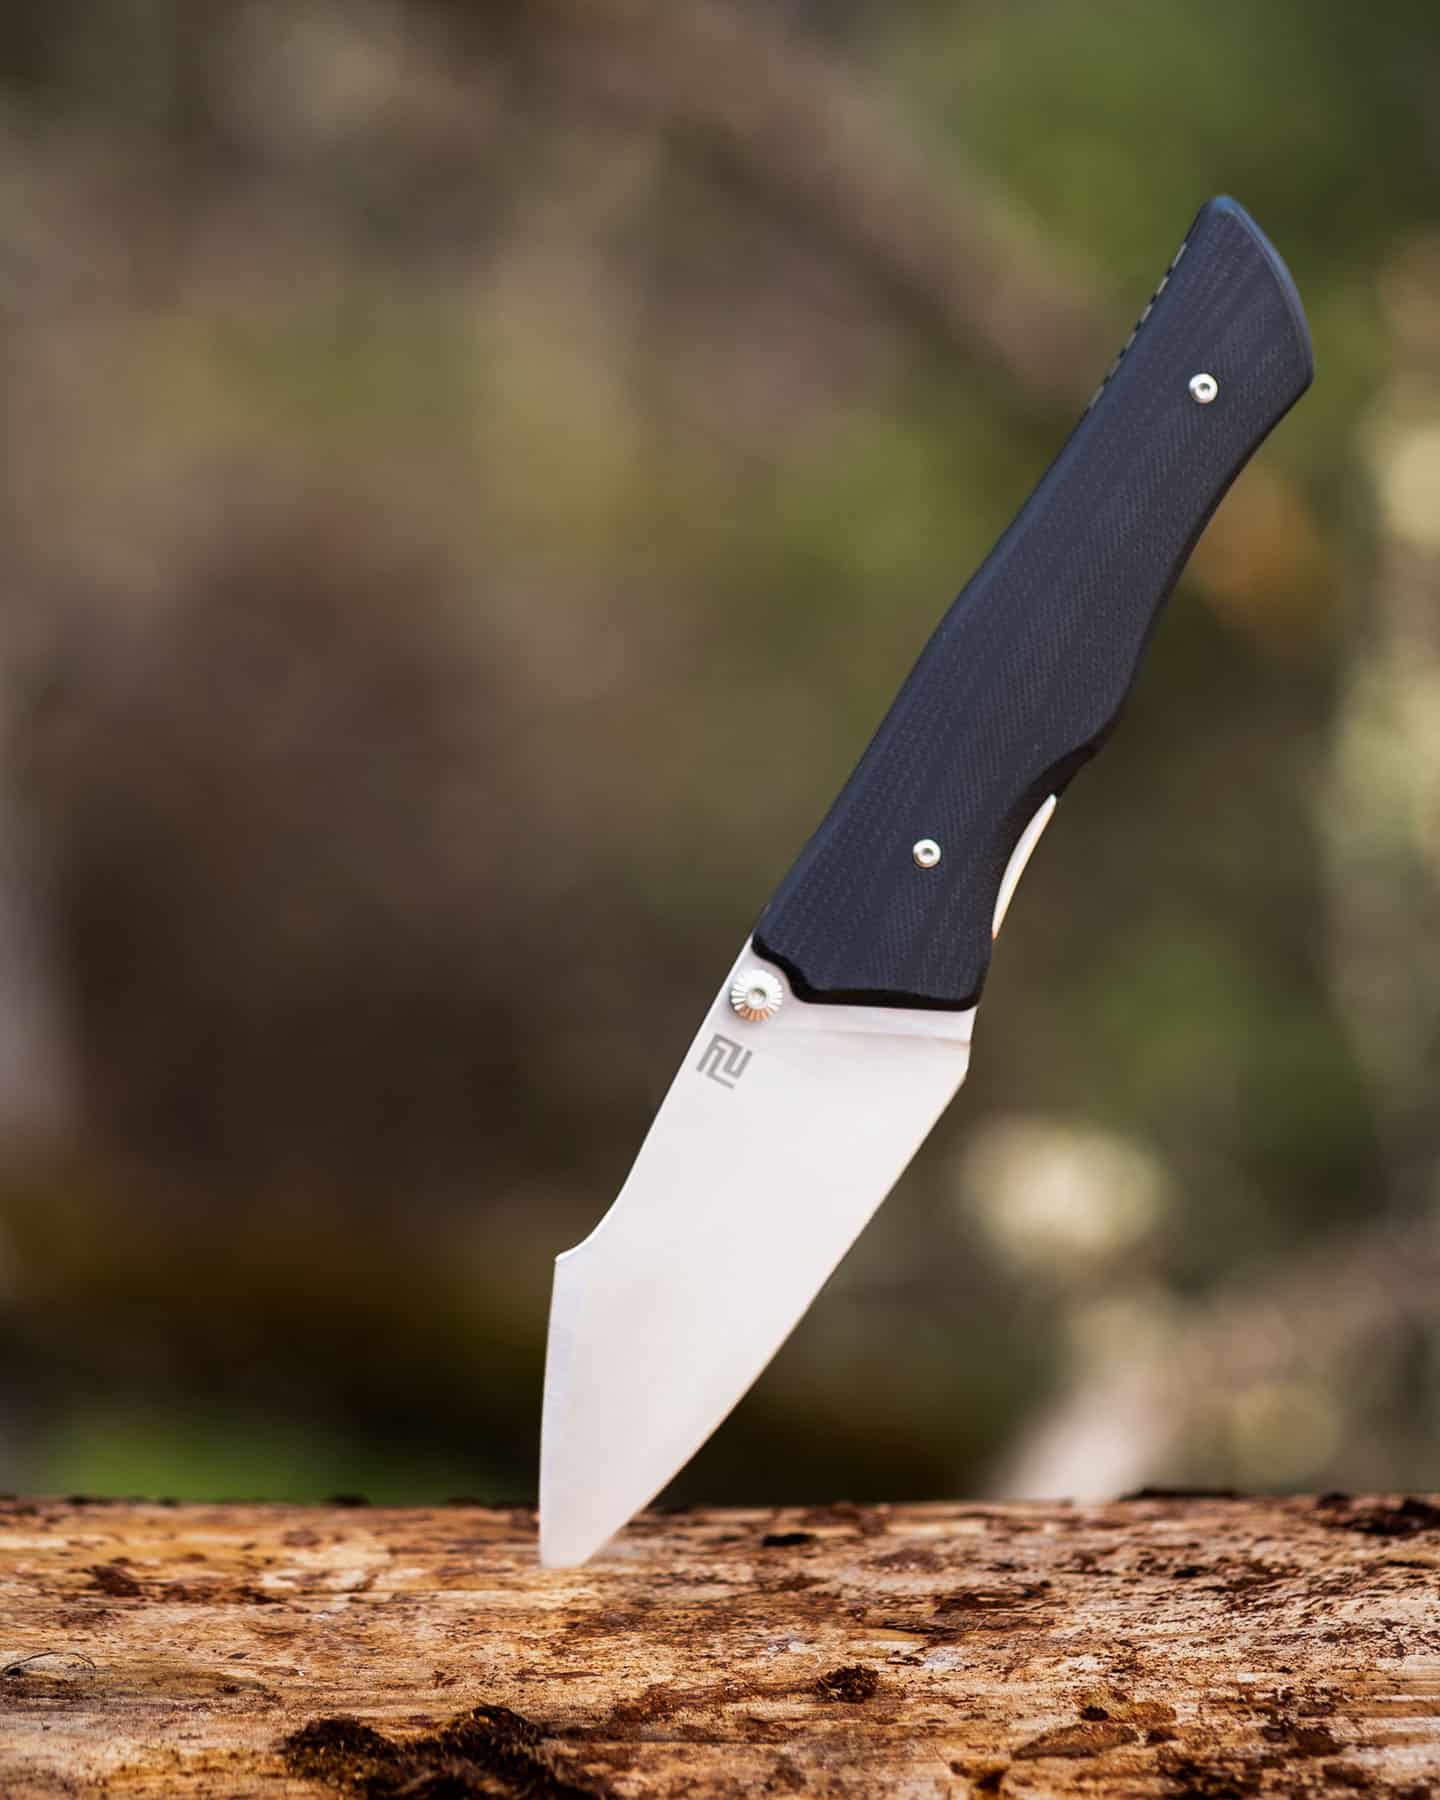 The Ahab is a sophisticated budget pocket knife with a big comfortable handle and a blade that is all about finger placement.